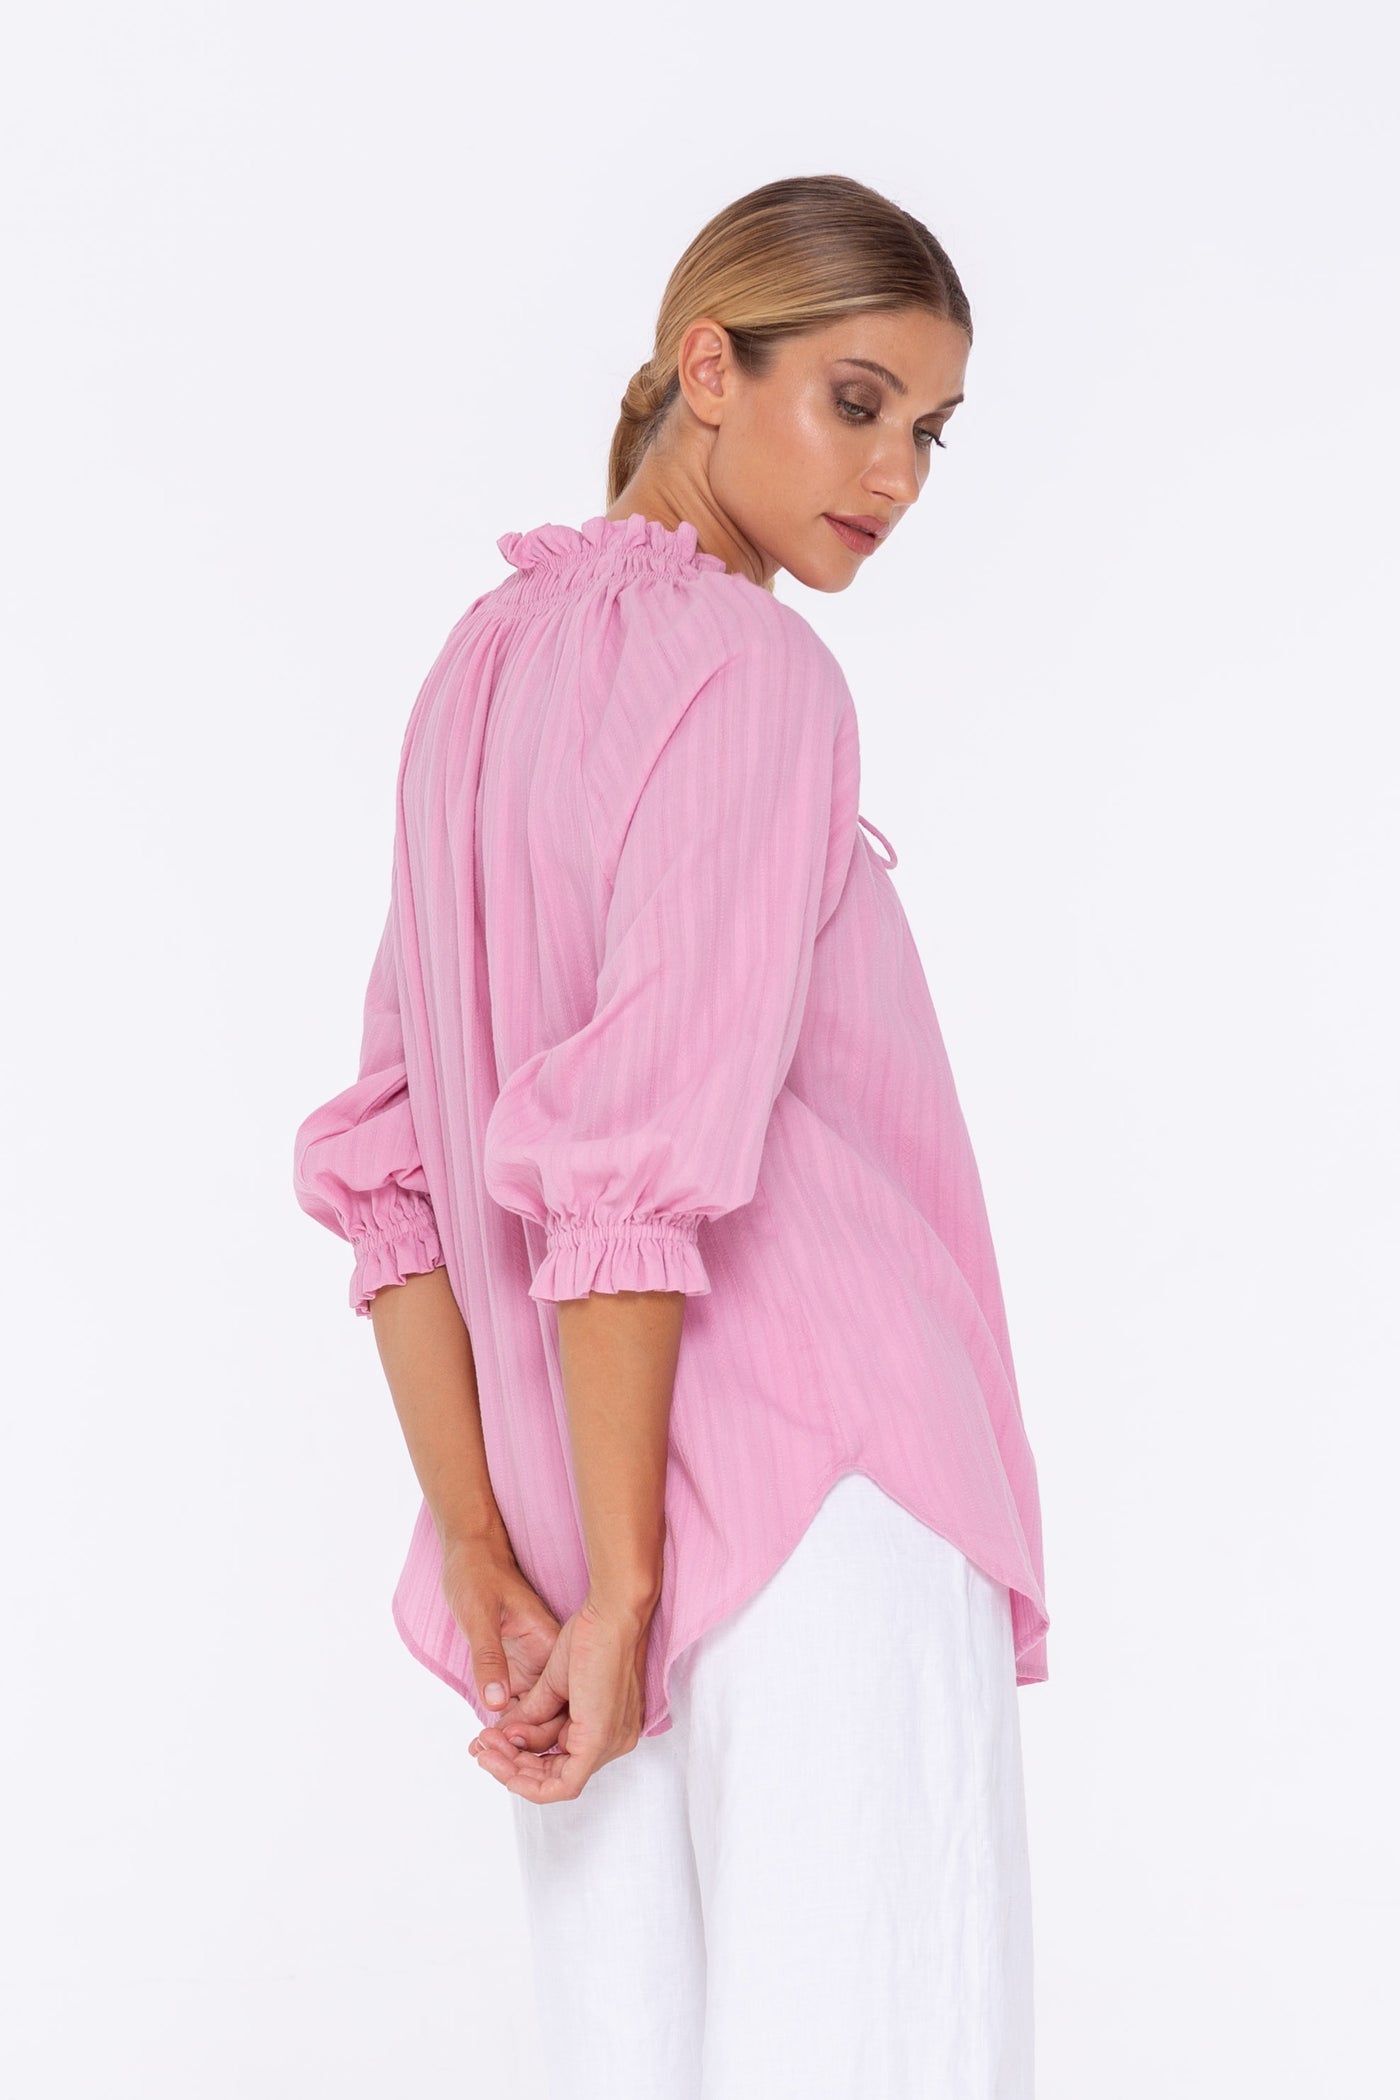 Blak French Kiss Top - Daisy Pink